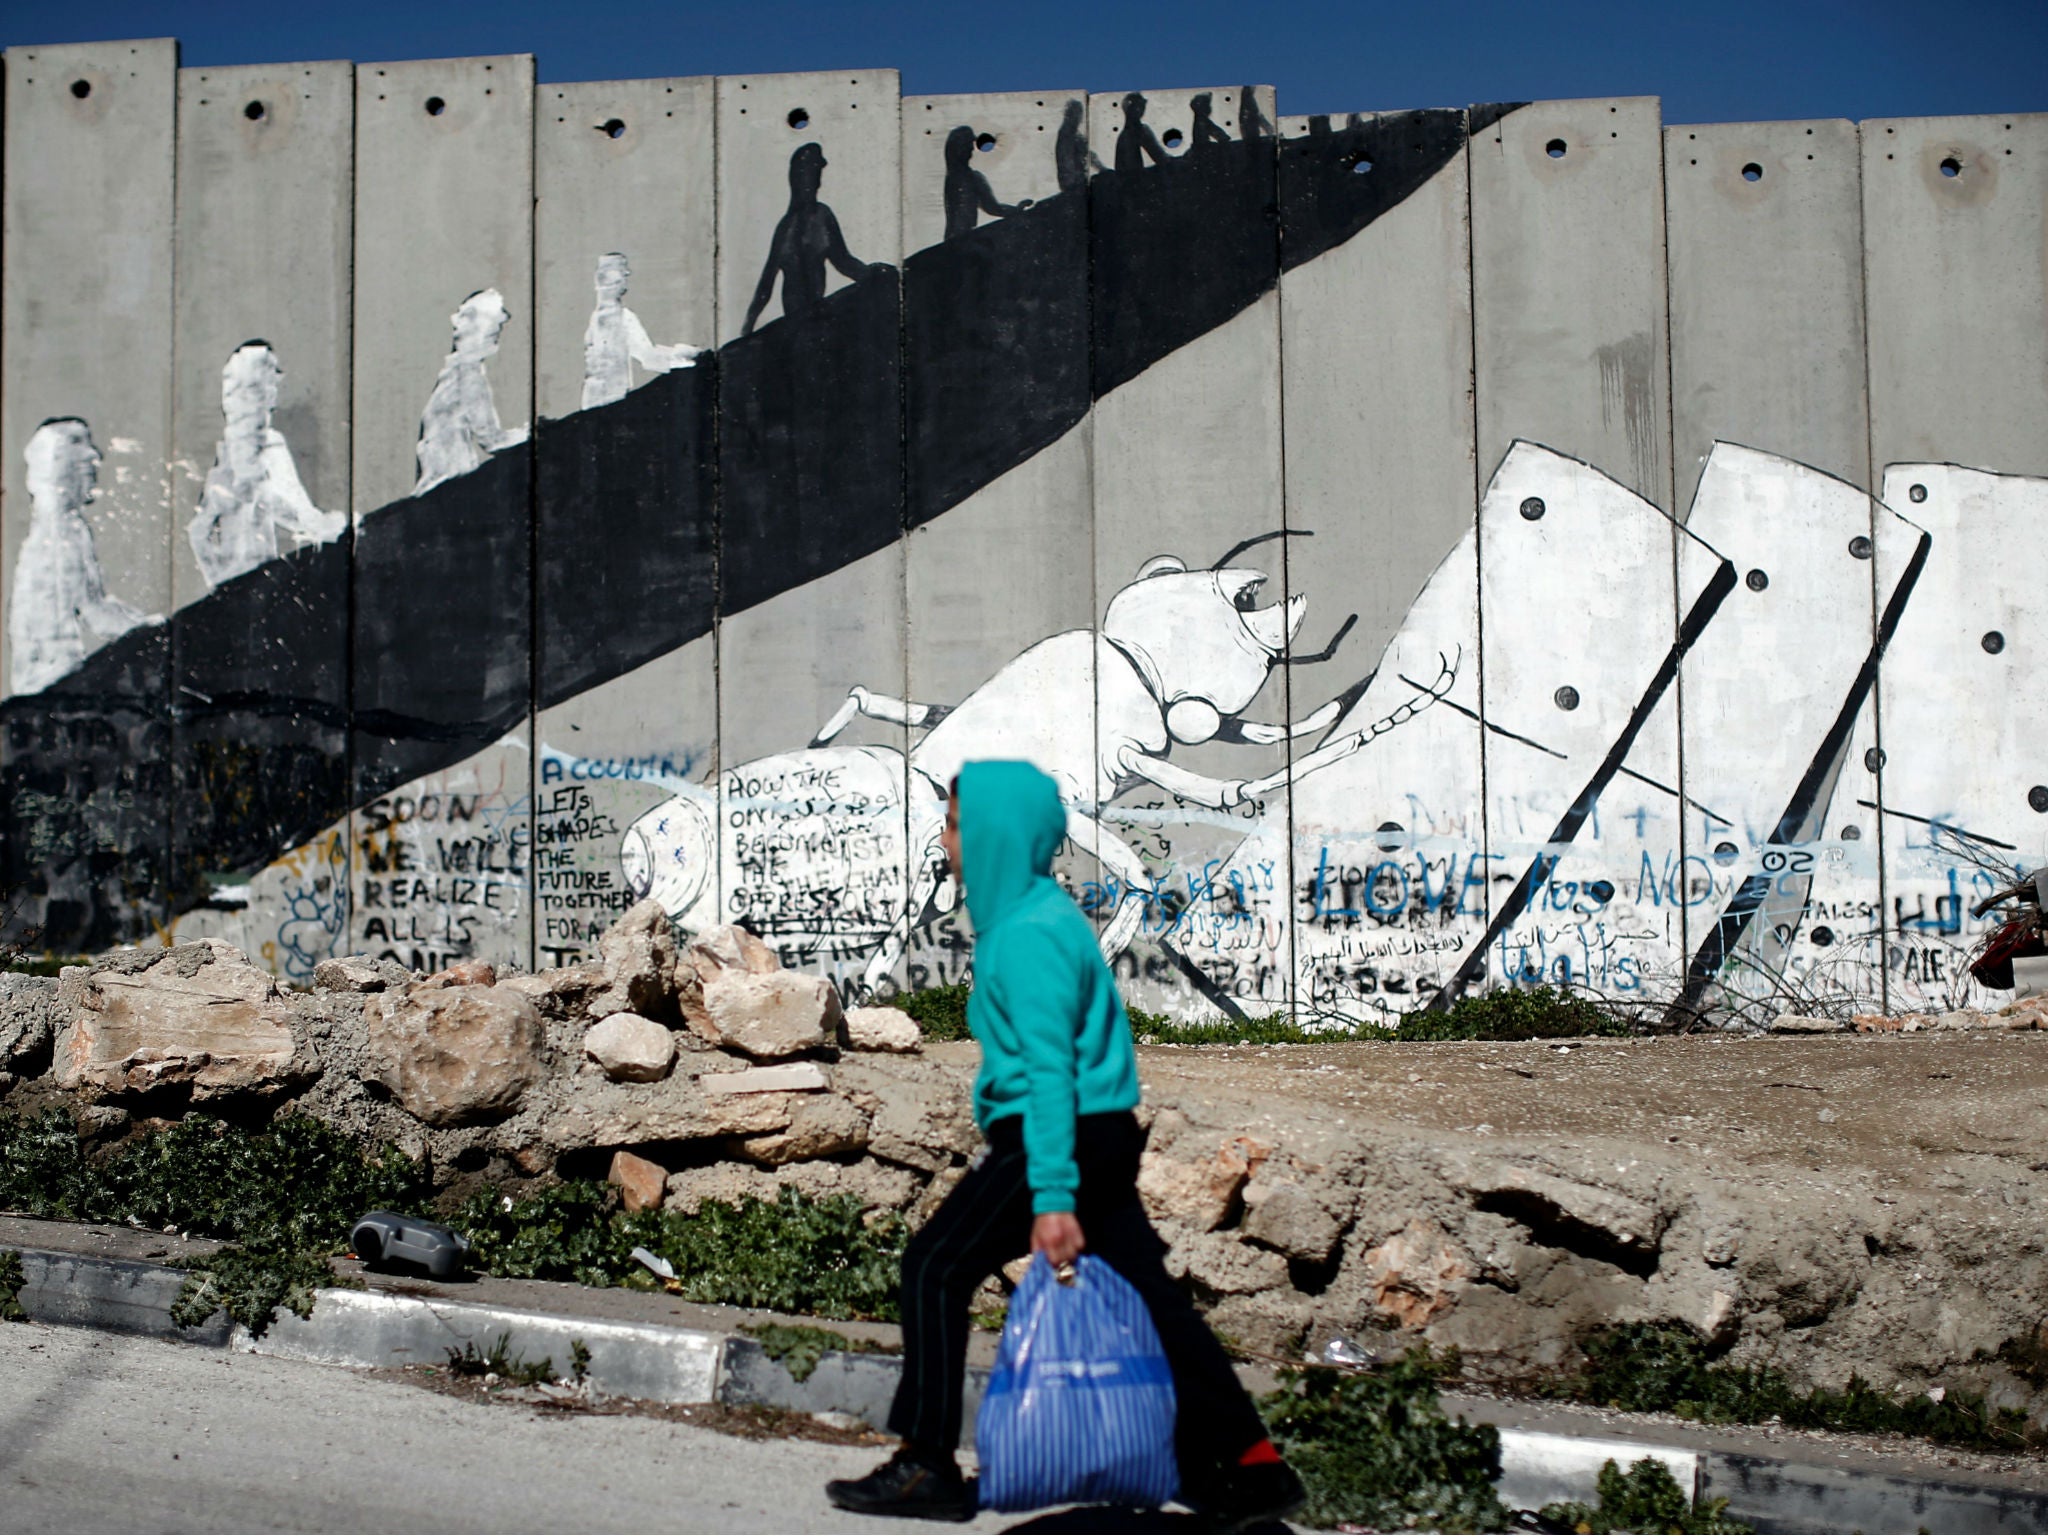 A Palestinian boy walks past graffiti painted on Israel's controversial separation barrier in the Aida refugee camp situated inside the West Bank town of Bethlehem, on February 12, 2016